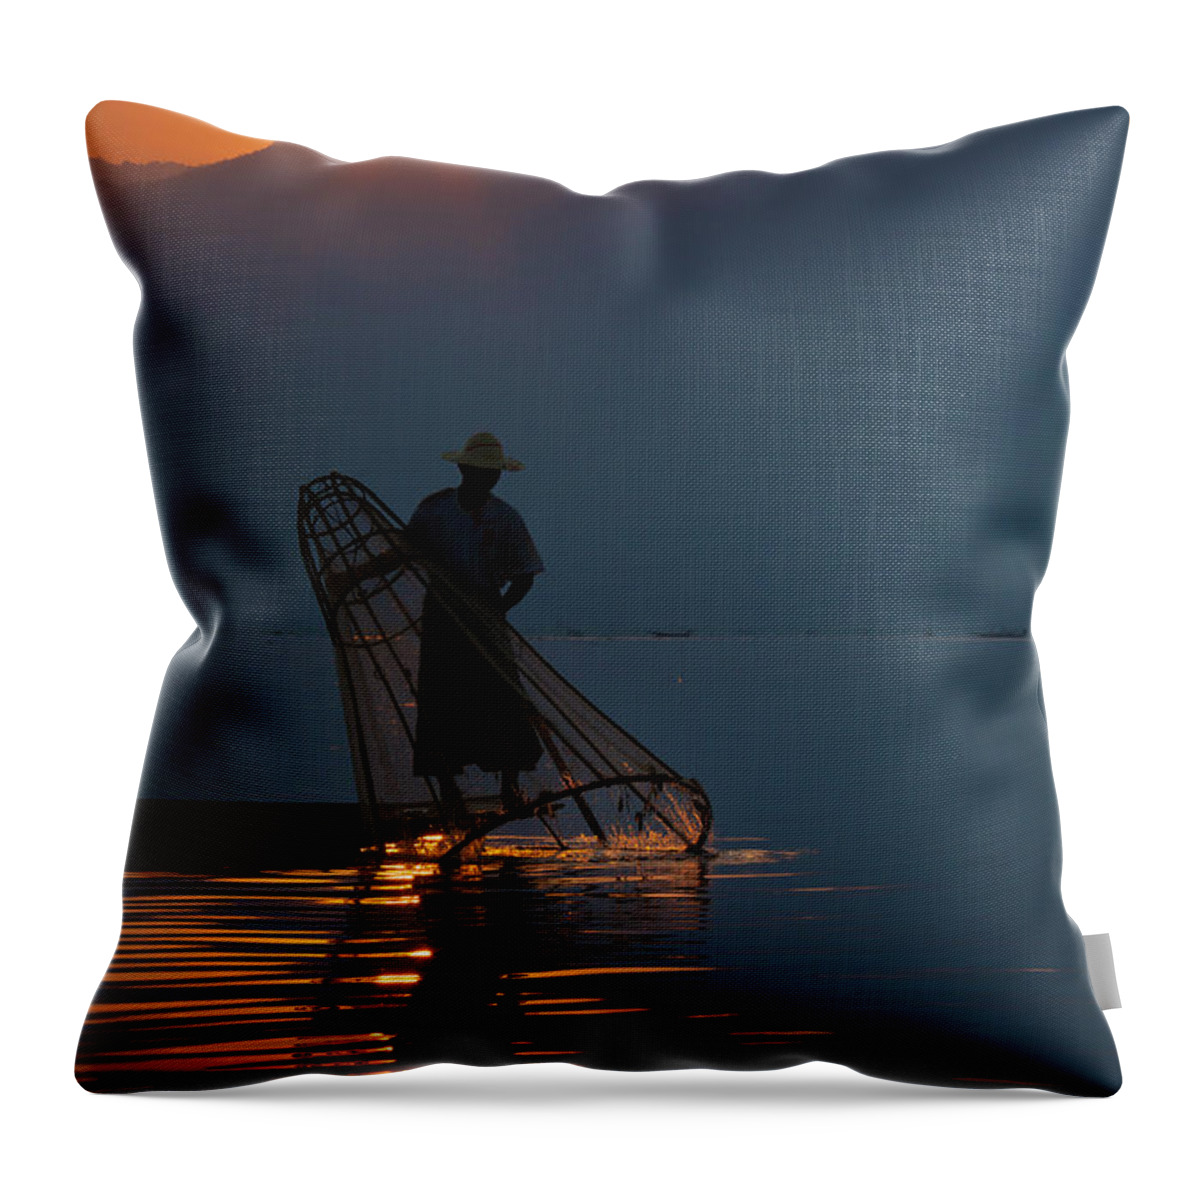 Lake Throw Pillow featuring the photograph Burma_d143 by Craig Lovell